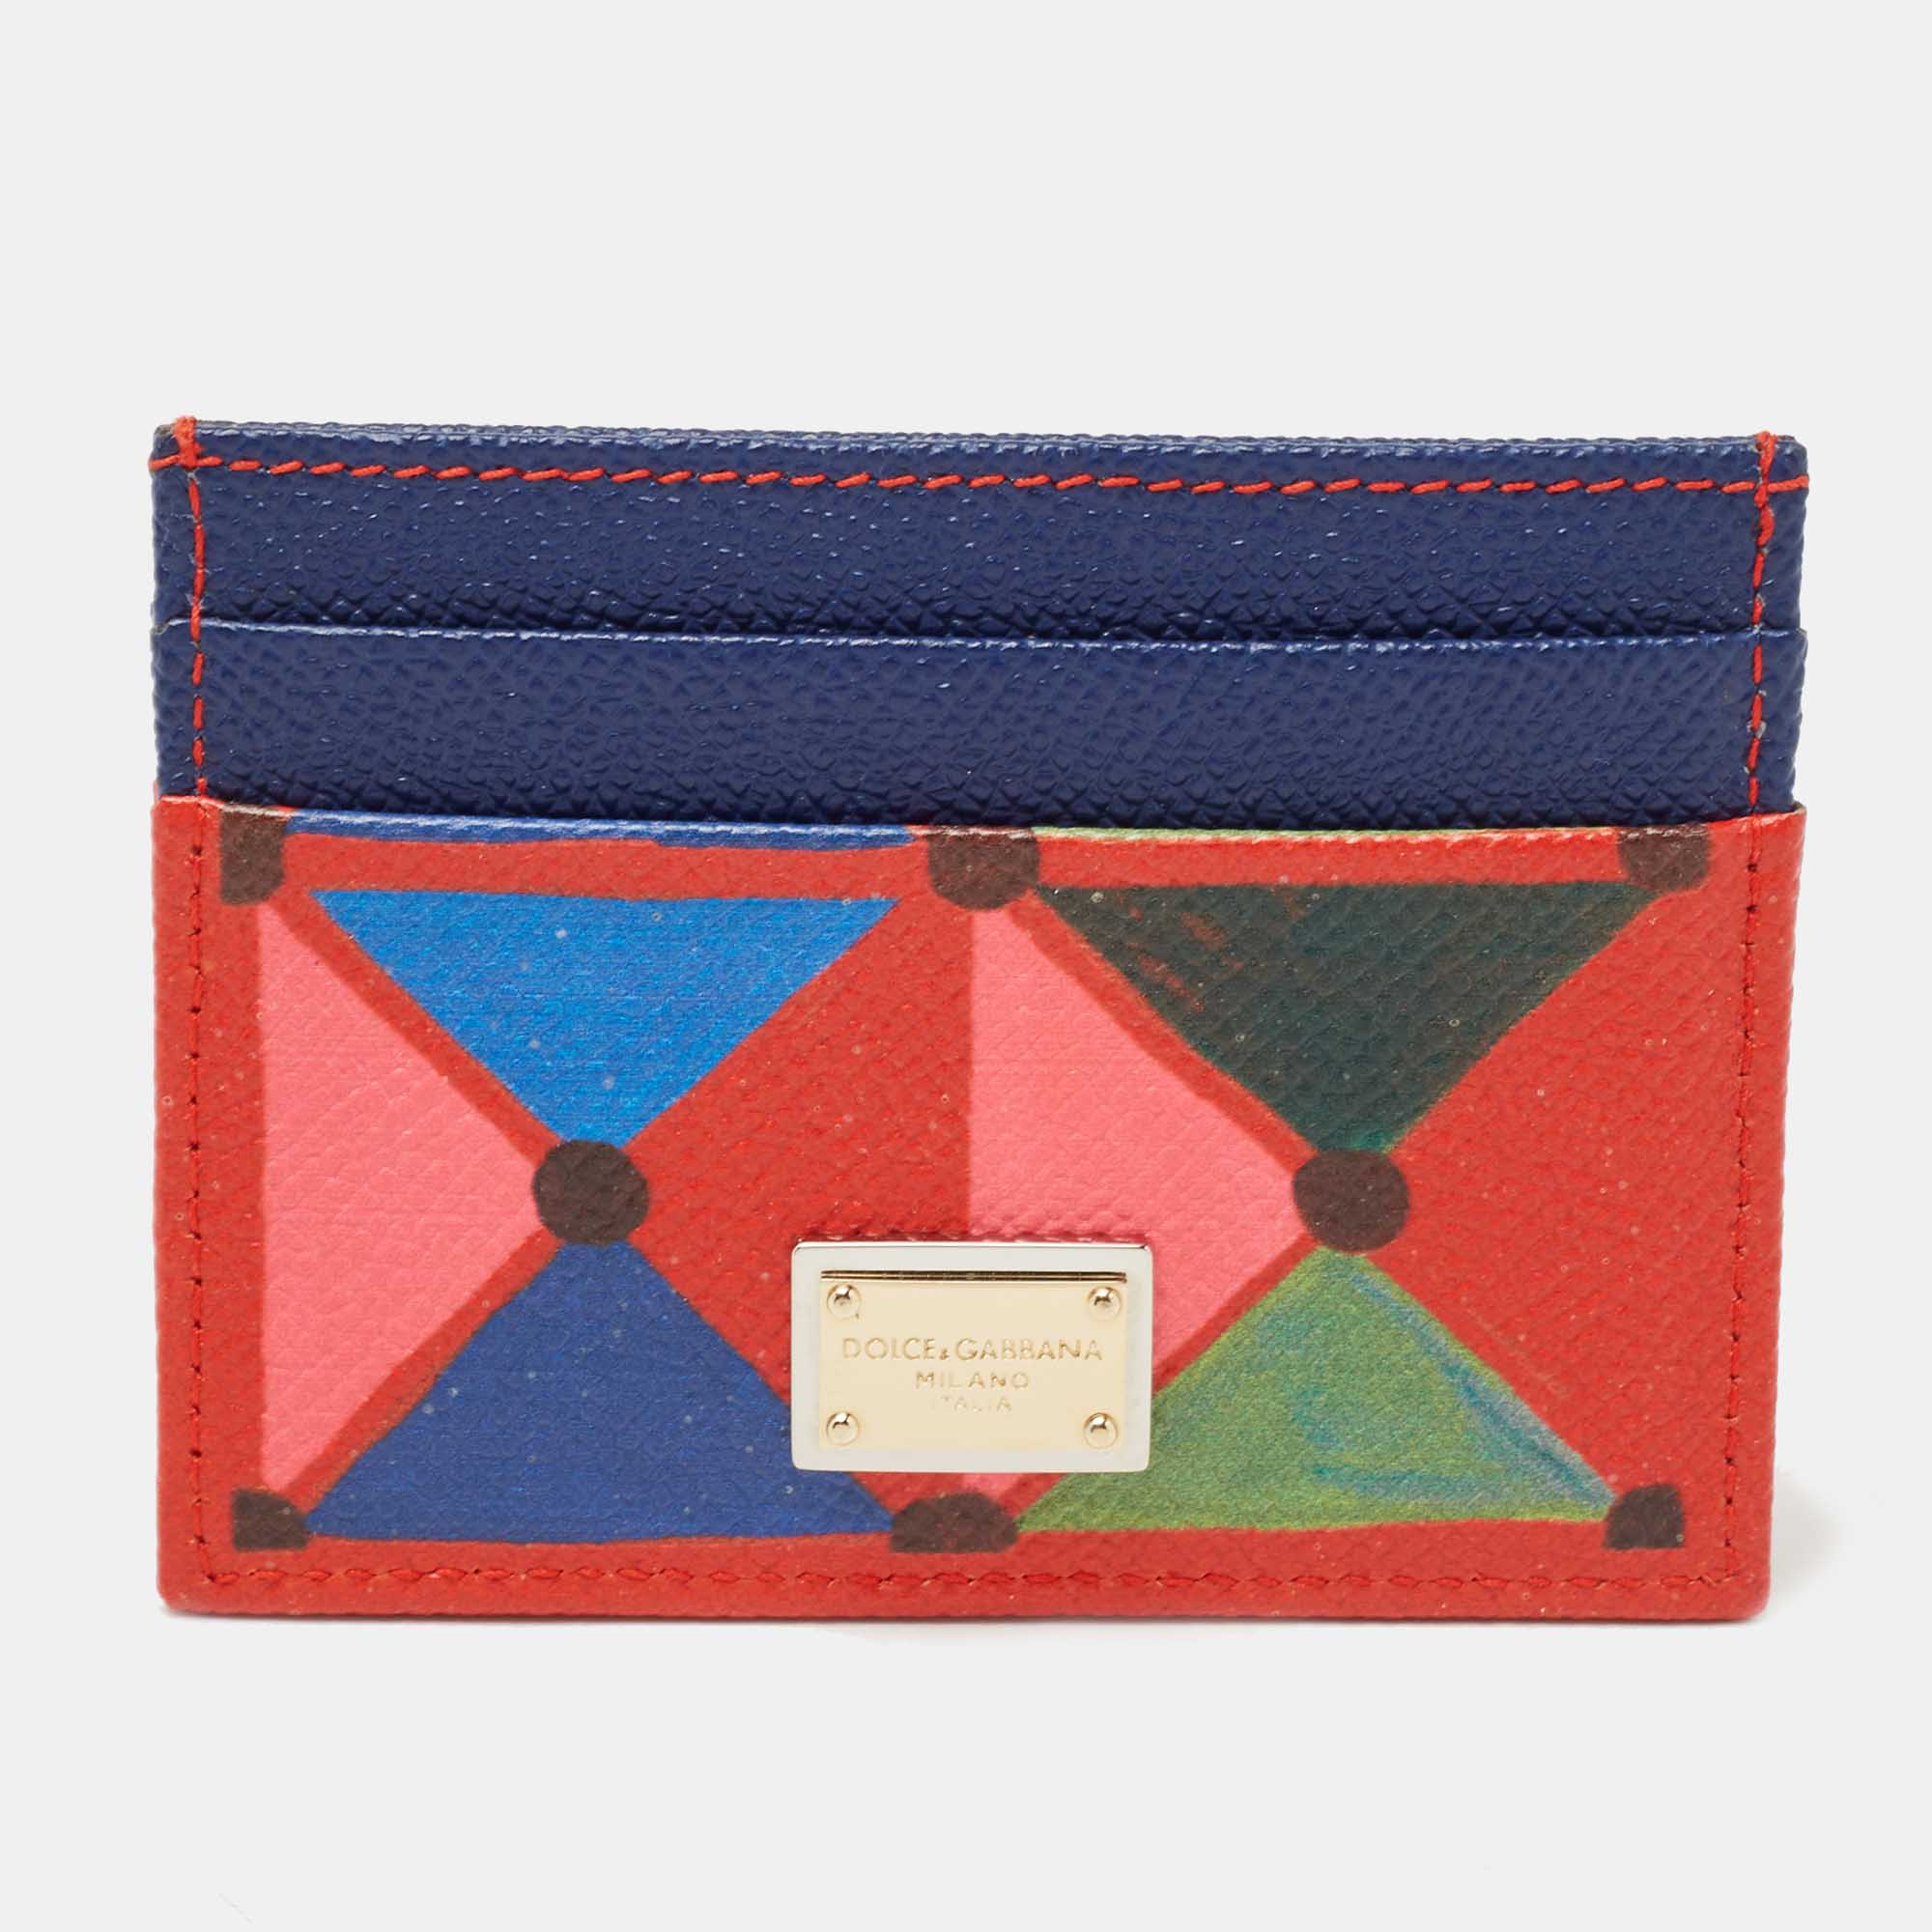 Dolce & Gabbana Red/Blue Printed Leather Card Holder